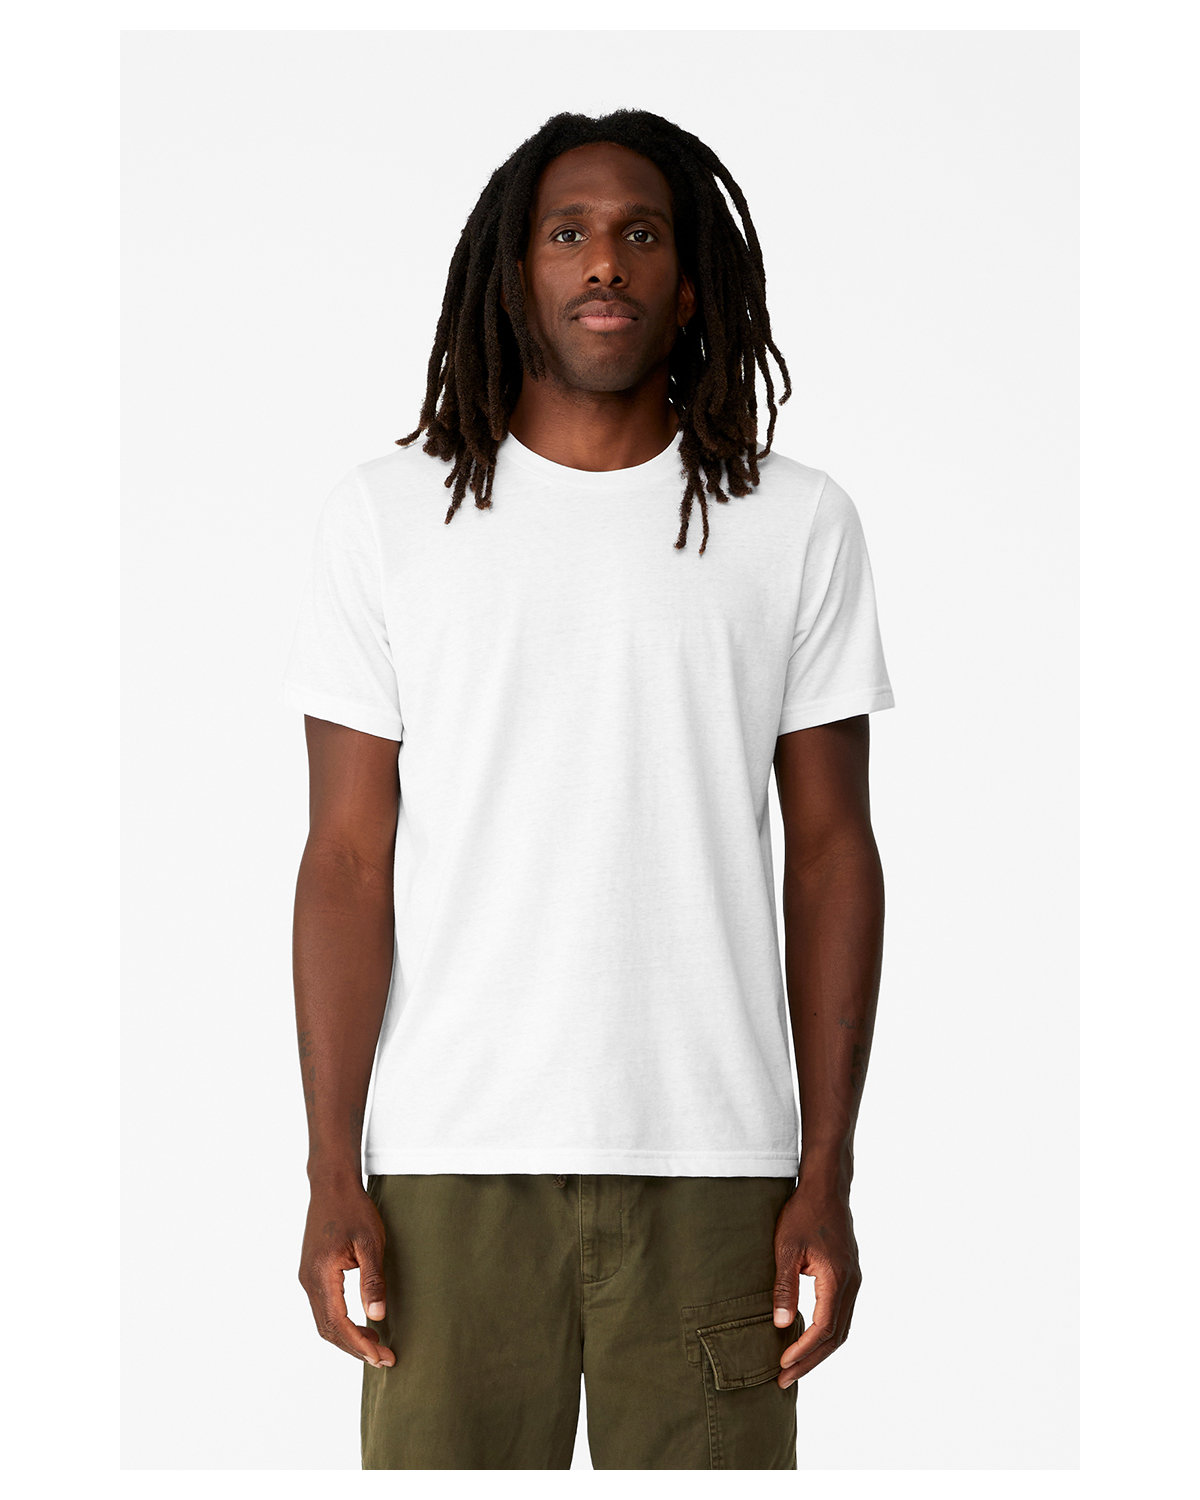 Airlume Cotton Crew Neck T Shirts, Cotton Tees